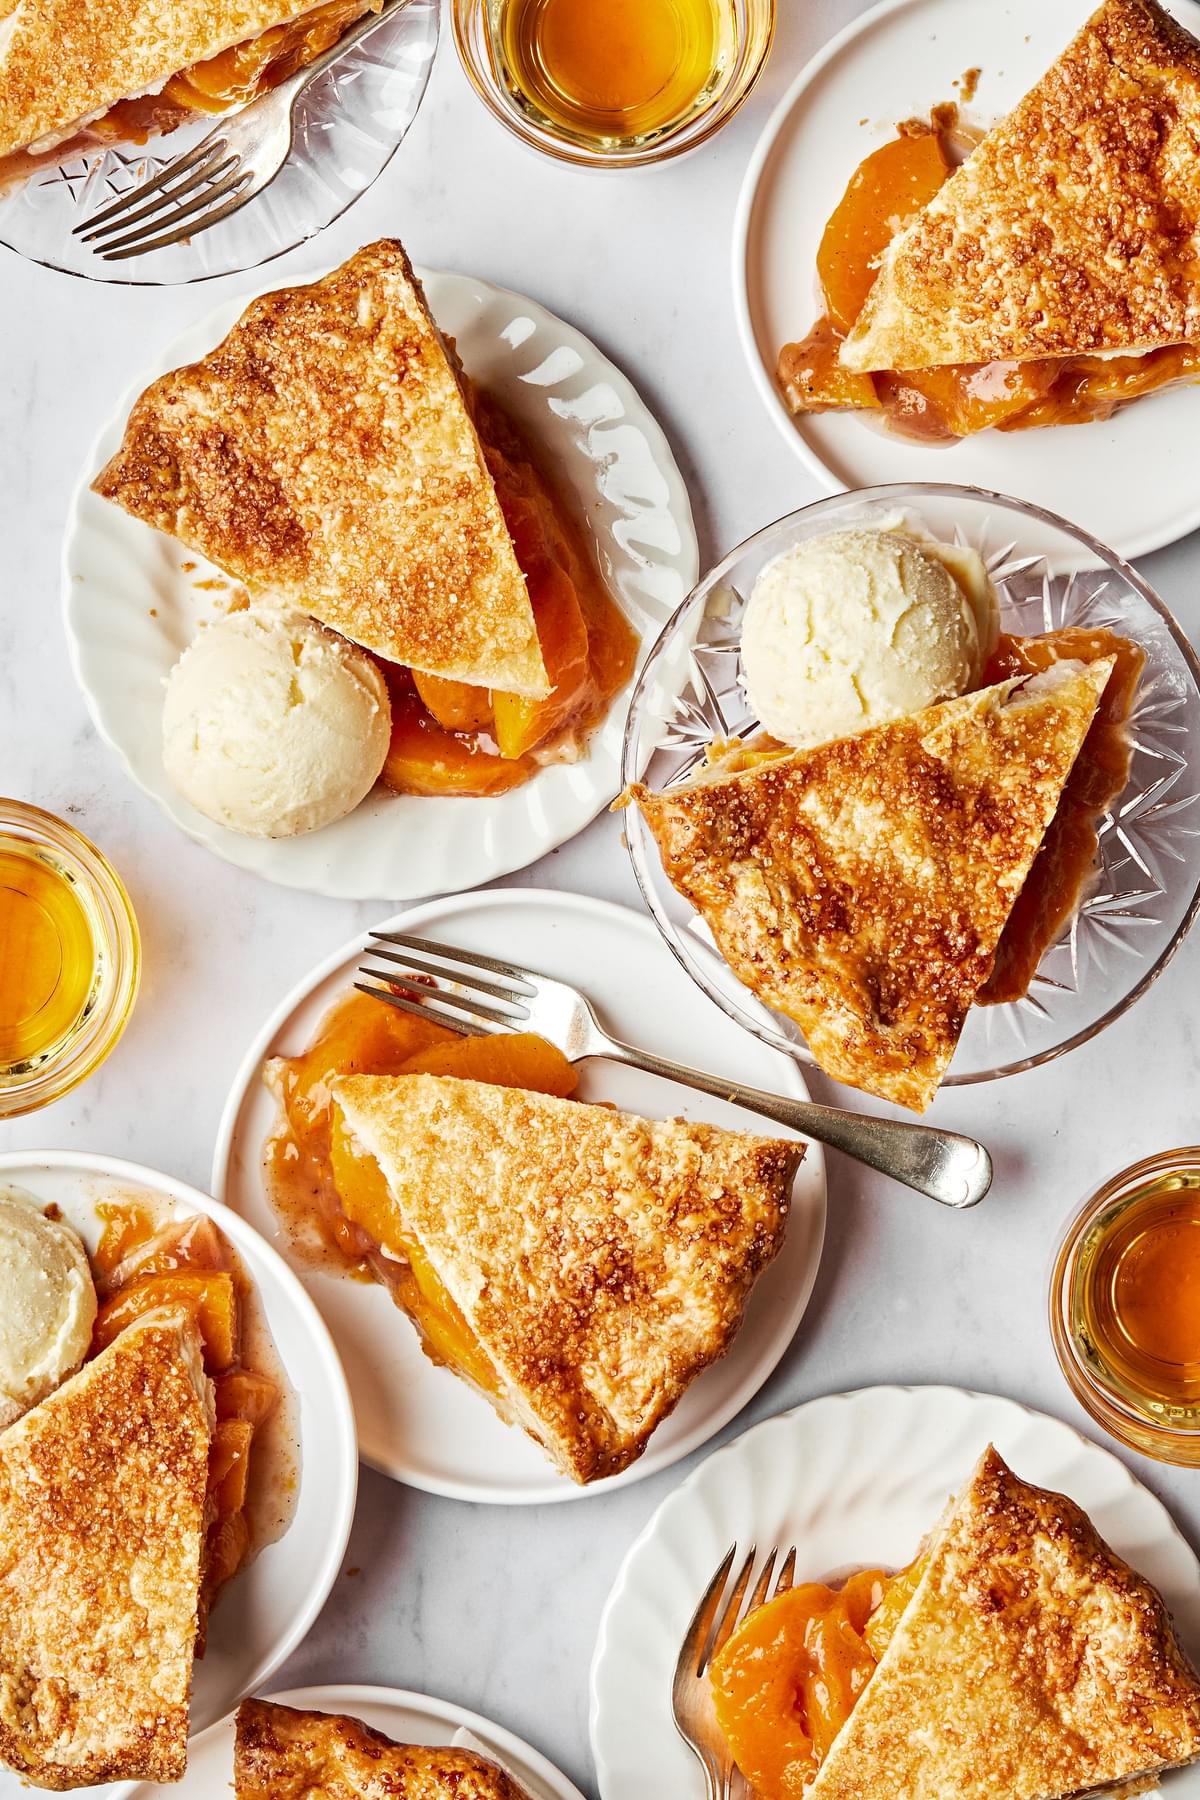 slices of homemade peach pie on plates served with scoops of vanilla ice cream